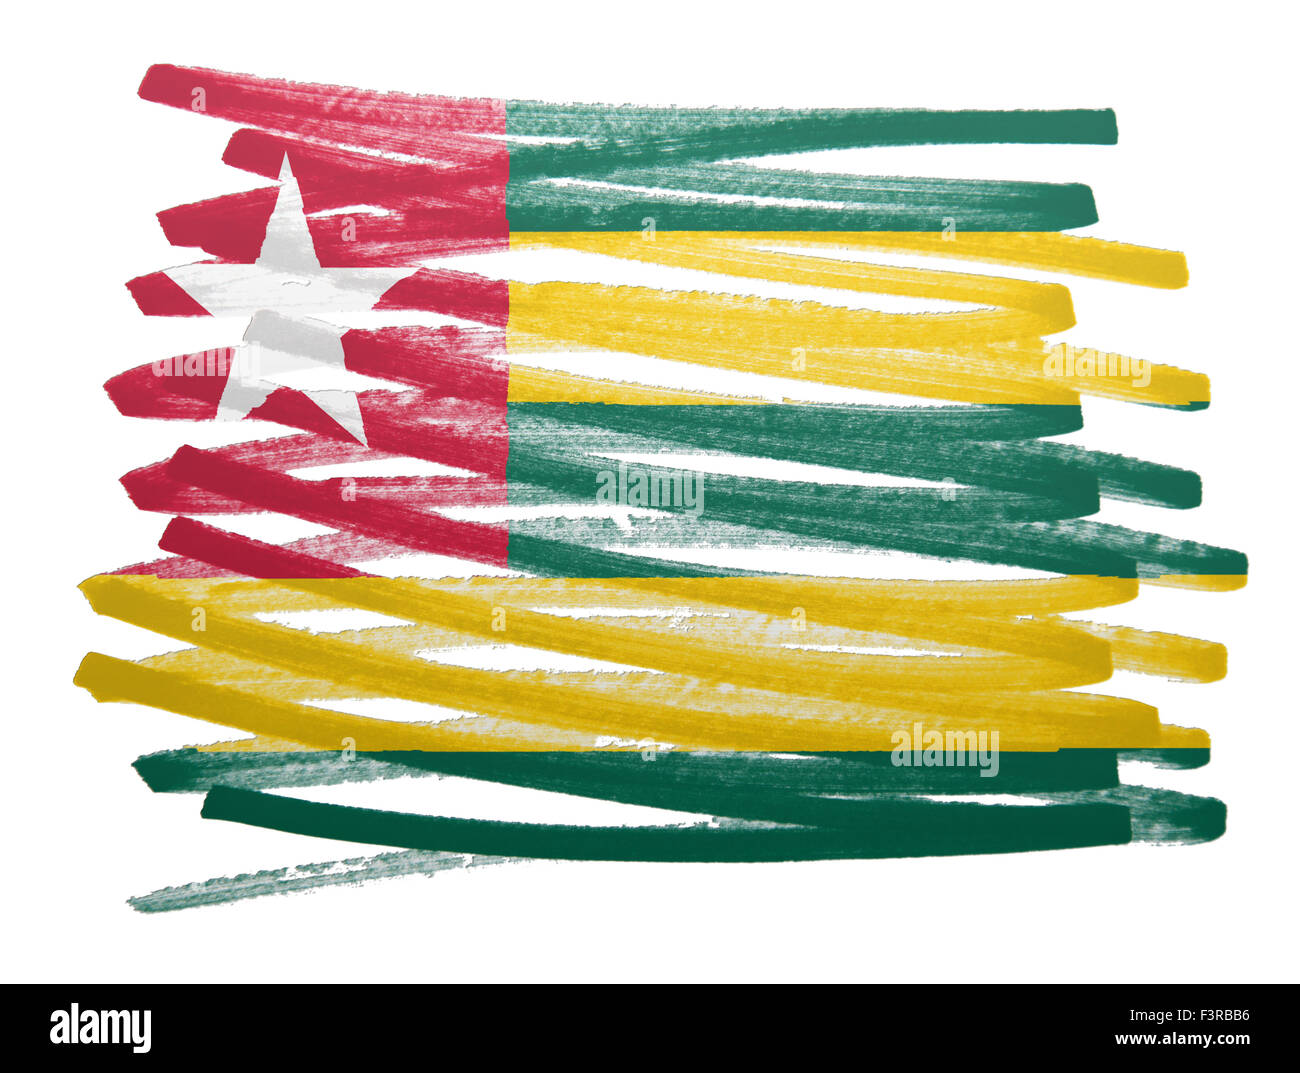 Flag illustration made with pen - Togo Stock Photo